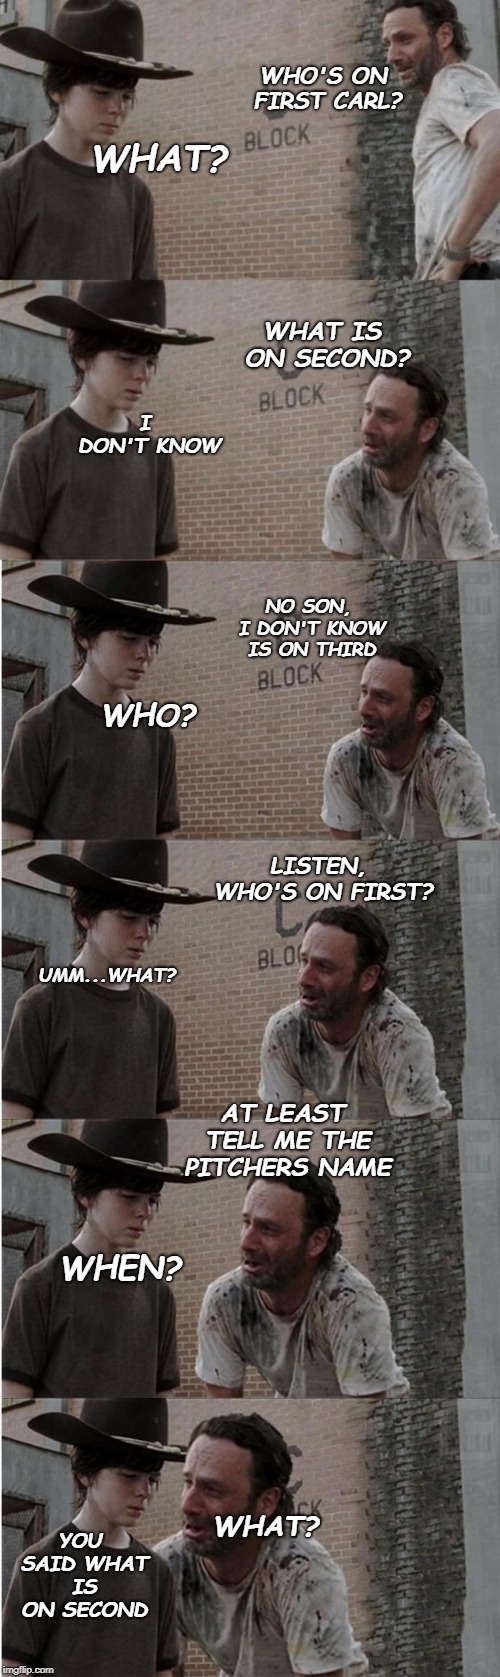 Rick and Carl Longer Meme | WHO'S ON FIRST CARL? WHAT? WHAT IS ON SECOND? I DON'T KNOW; NO SON, I DON'T KNOW IS ON THIRD; WHO? LISTEN, WHO'S ON FIRST? UMM...WHAT? AT LEAST TELL ME THE PITCHERS NAME; WHEN? YOU SAID WHAT IS ON SECOND; WHAT? | image tagged in memes,rick and carl longer | made w/ Imgflip meme maker